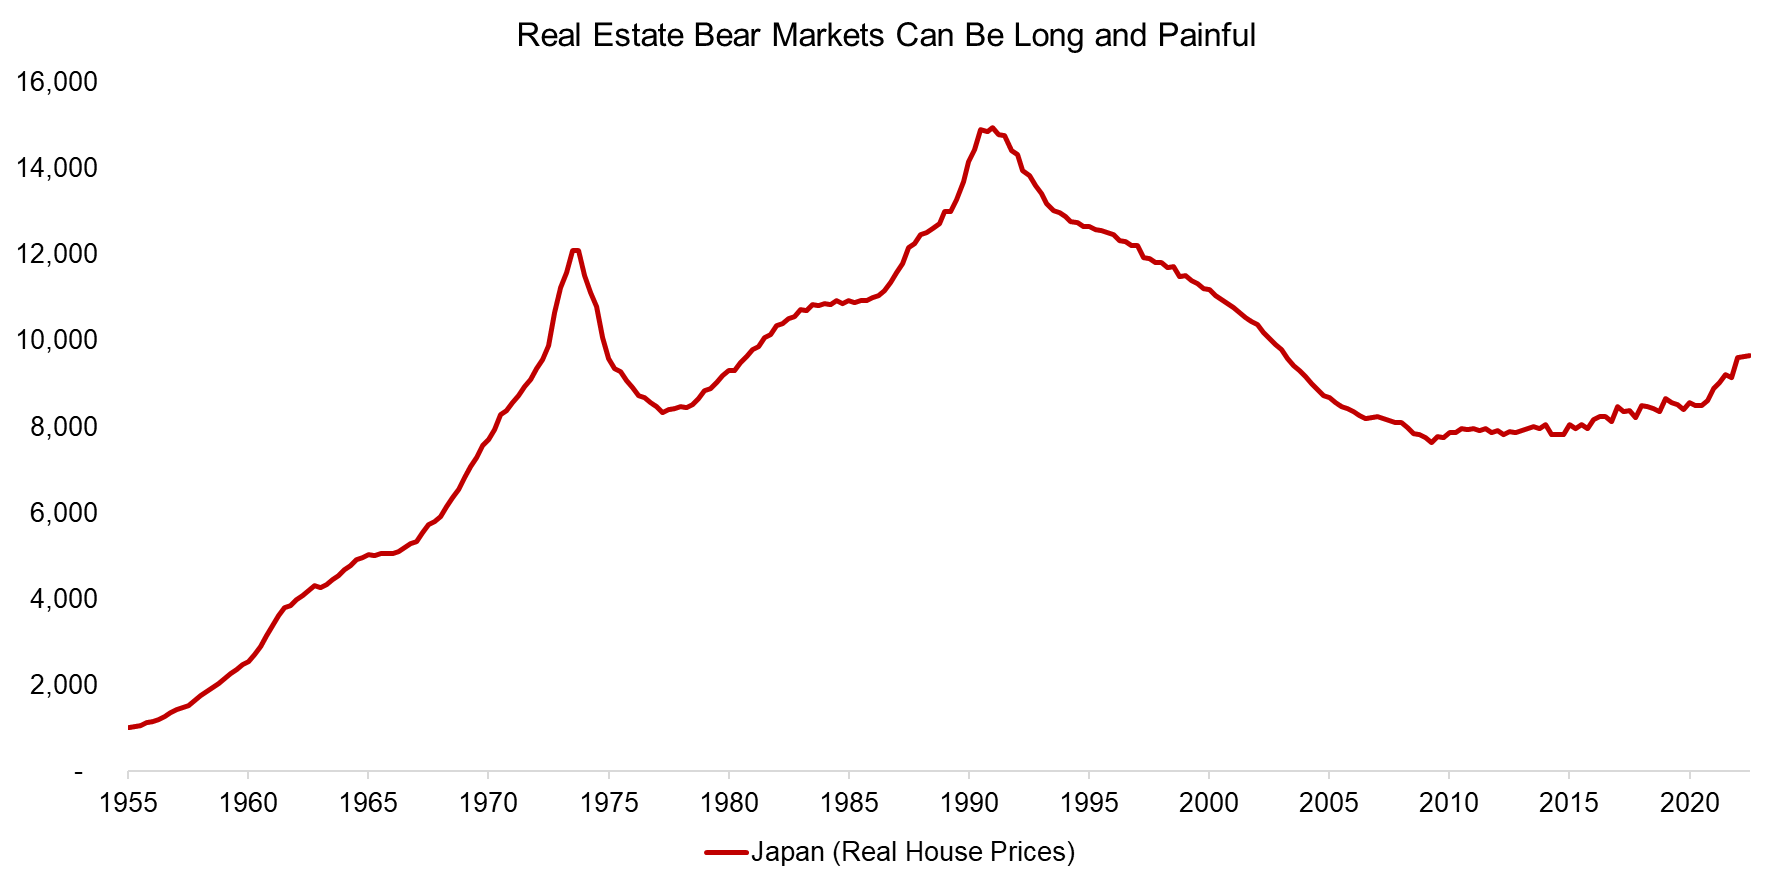 Real Estate Bear Markets Can Be Long and Painful